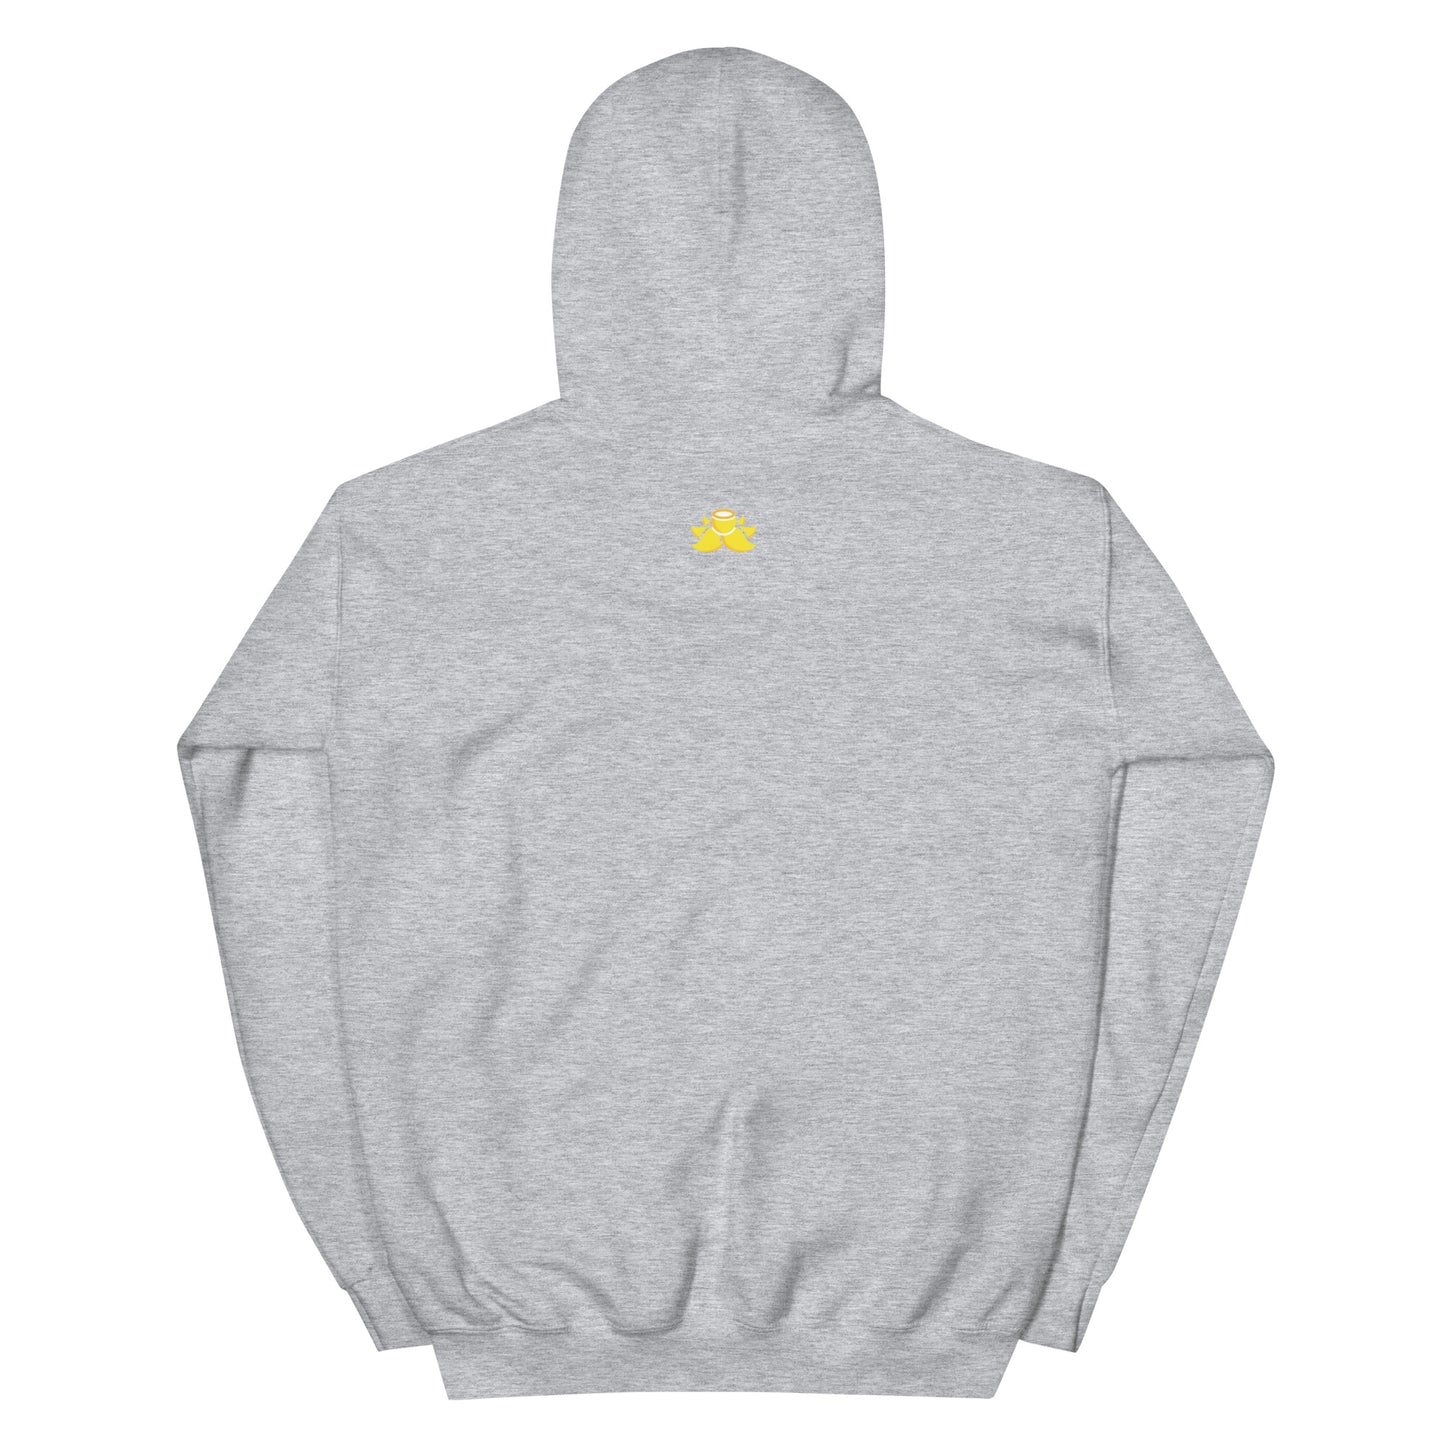 Welshie Welsh Connection Hoodie